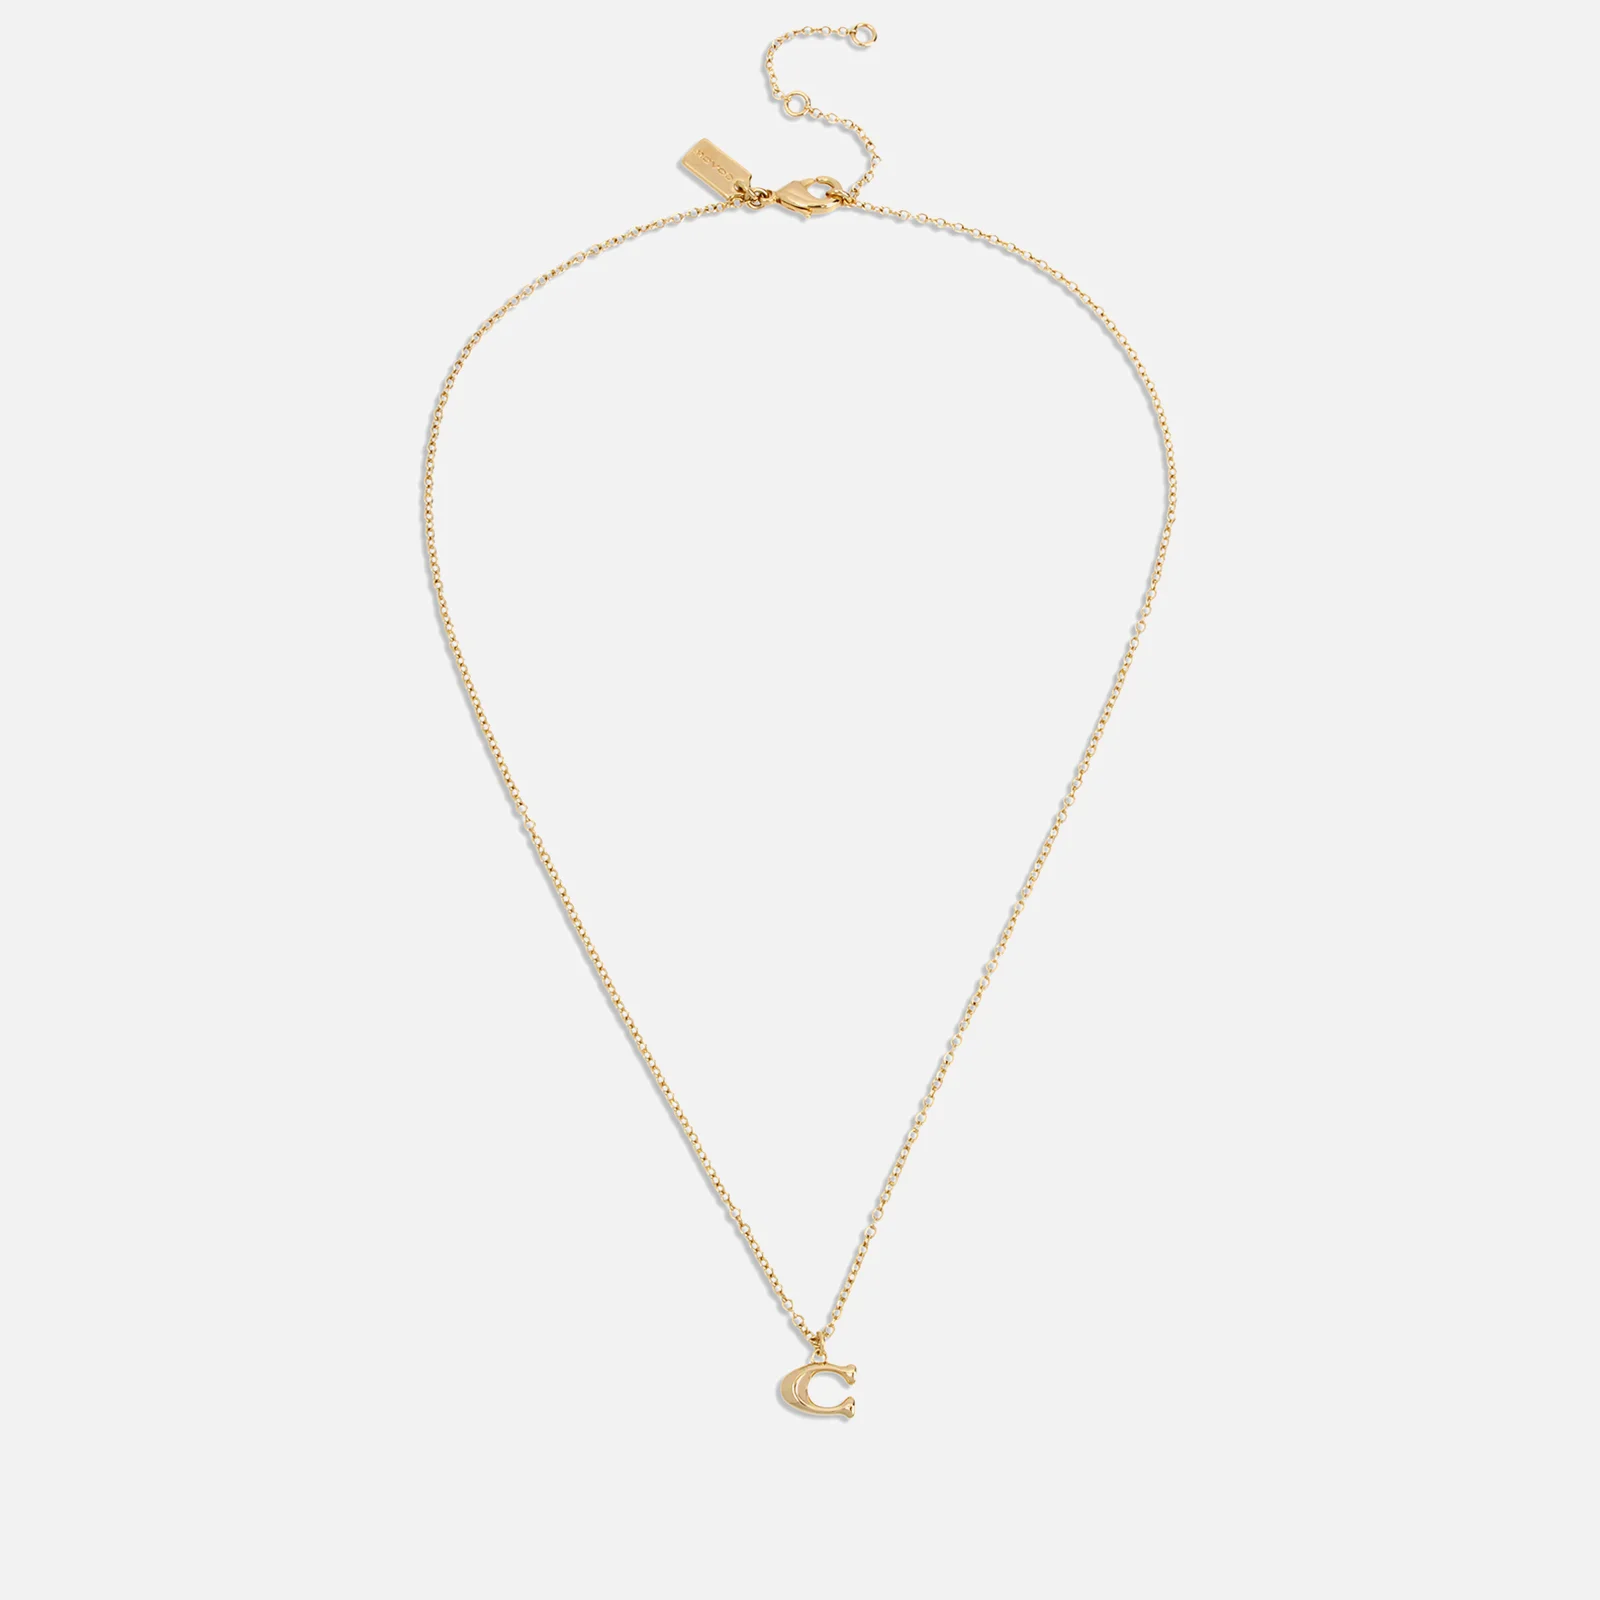 Coach Core Essentials Gold-Plated Necklace Image 1